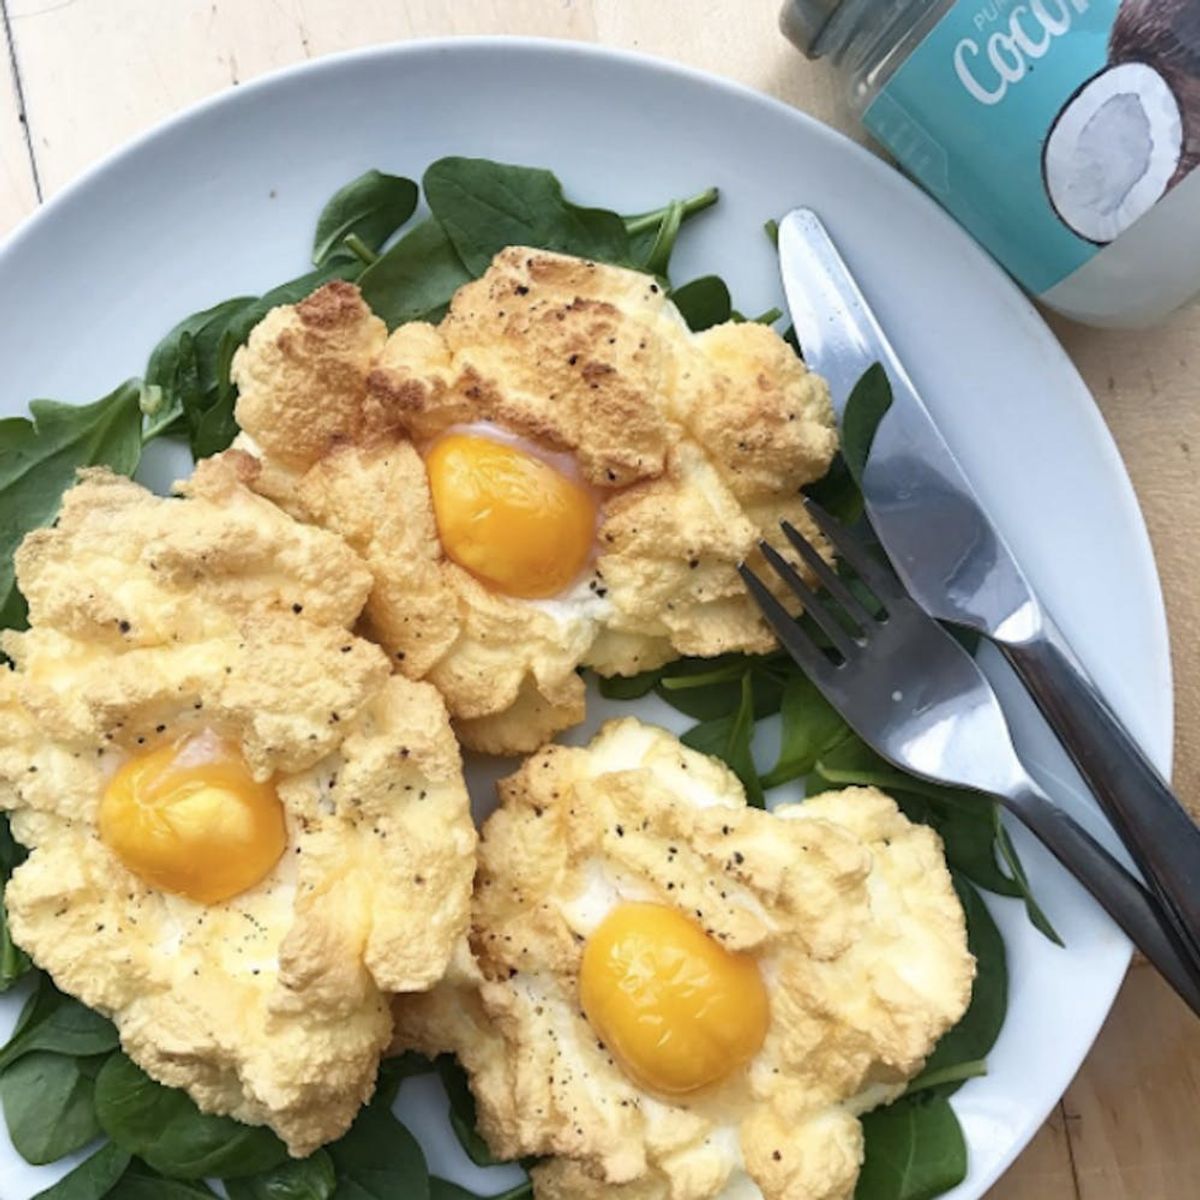 Cloud Eggs Are the Most Whimsical Breakfast You’ll Ever See… And They’re All Over Instagram